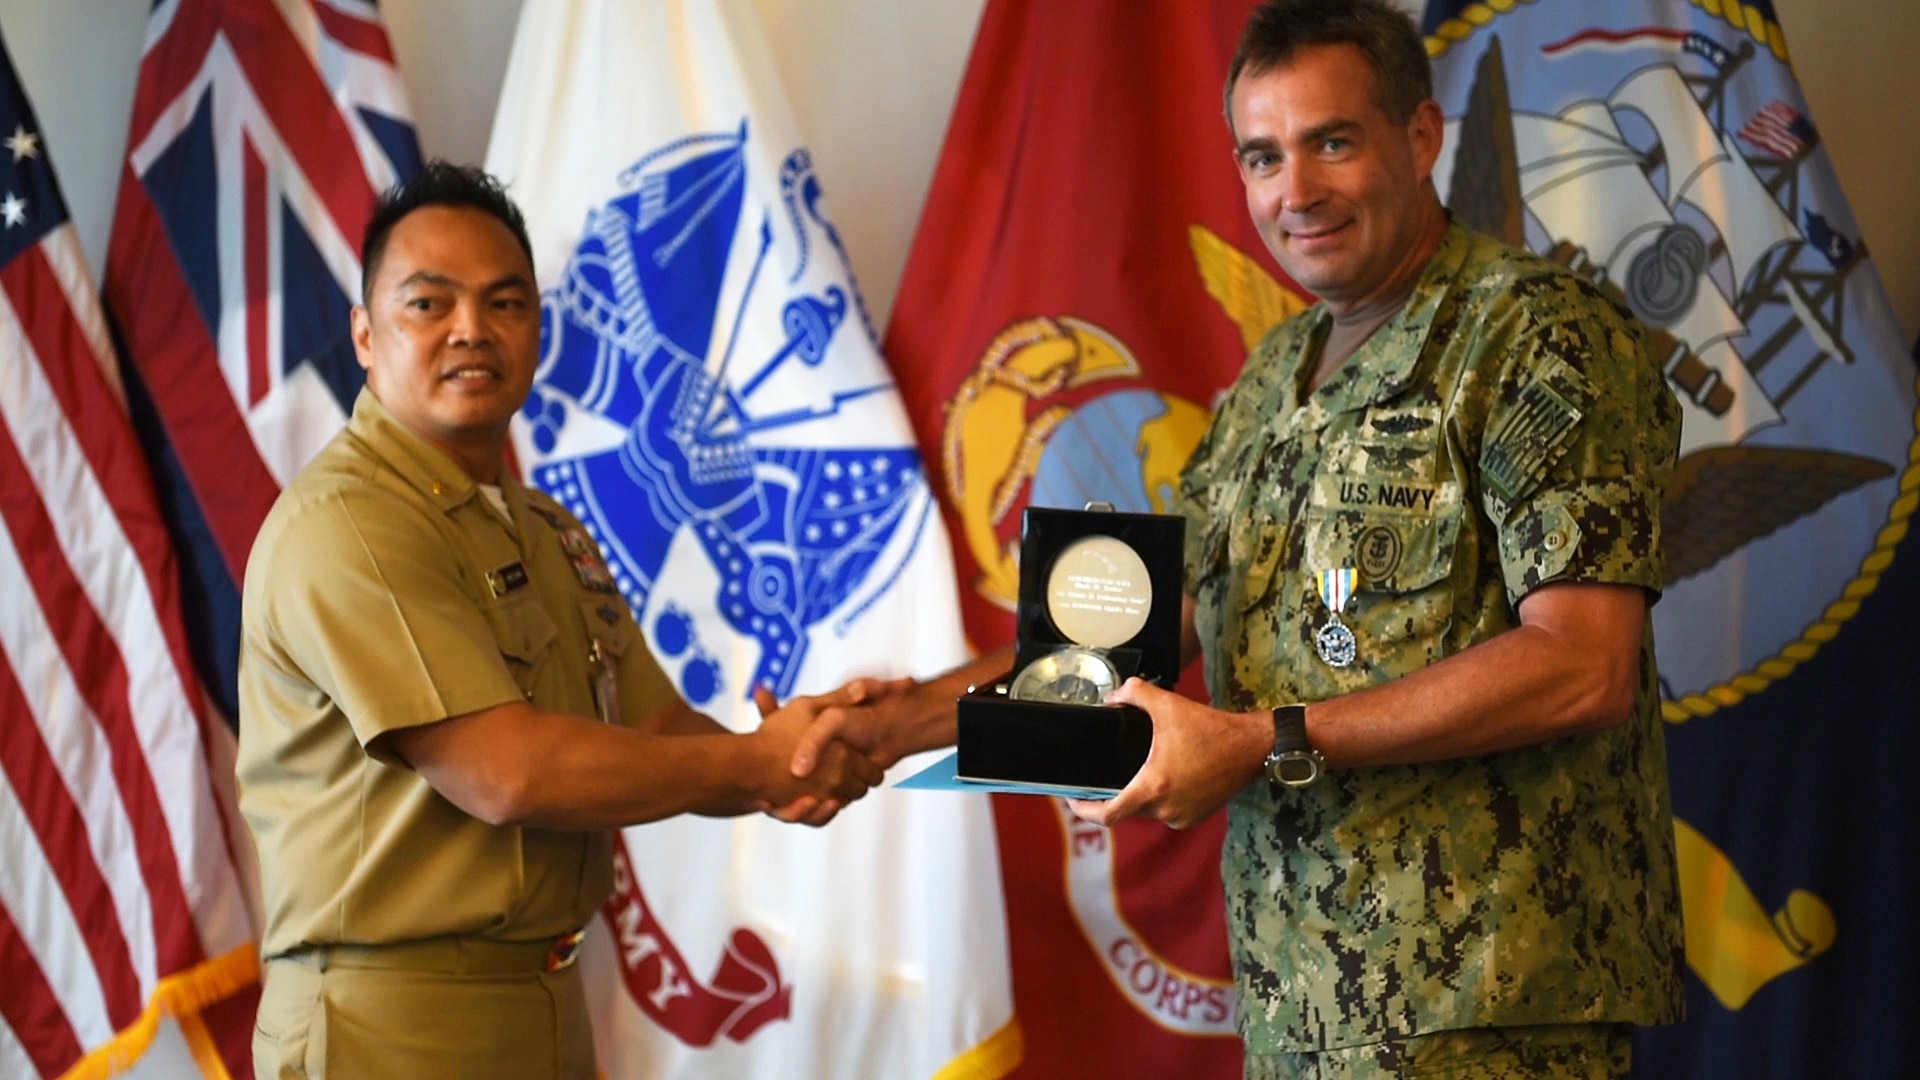 (July 18, 2016) - Fleet Master Chief Mark Rudes, left, U.S. Pacific Command (USPACOM) senior enlisted leader and native of Speculator, N.Y., receives a commemorative compass from Master Chief Culinary Specialist Arturo Luna, USPACOM Navy element command master chief, during an awards ceremony at Camp H. M. Smith, Hawaii June 18. Rudes also received the Defense Superior Service Medal during the ceremony that marked the end of more than four years of service as the USPACOM senior enlisted leader. (DoD photo by Chief Mass Communication Specialist Patrick Dille)